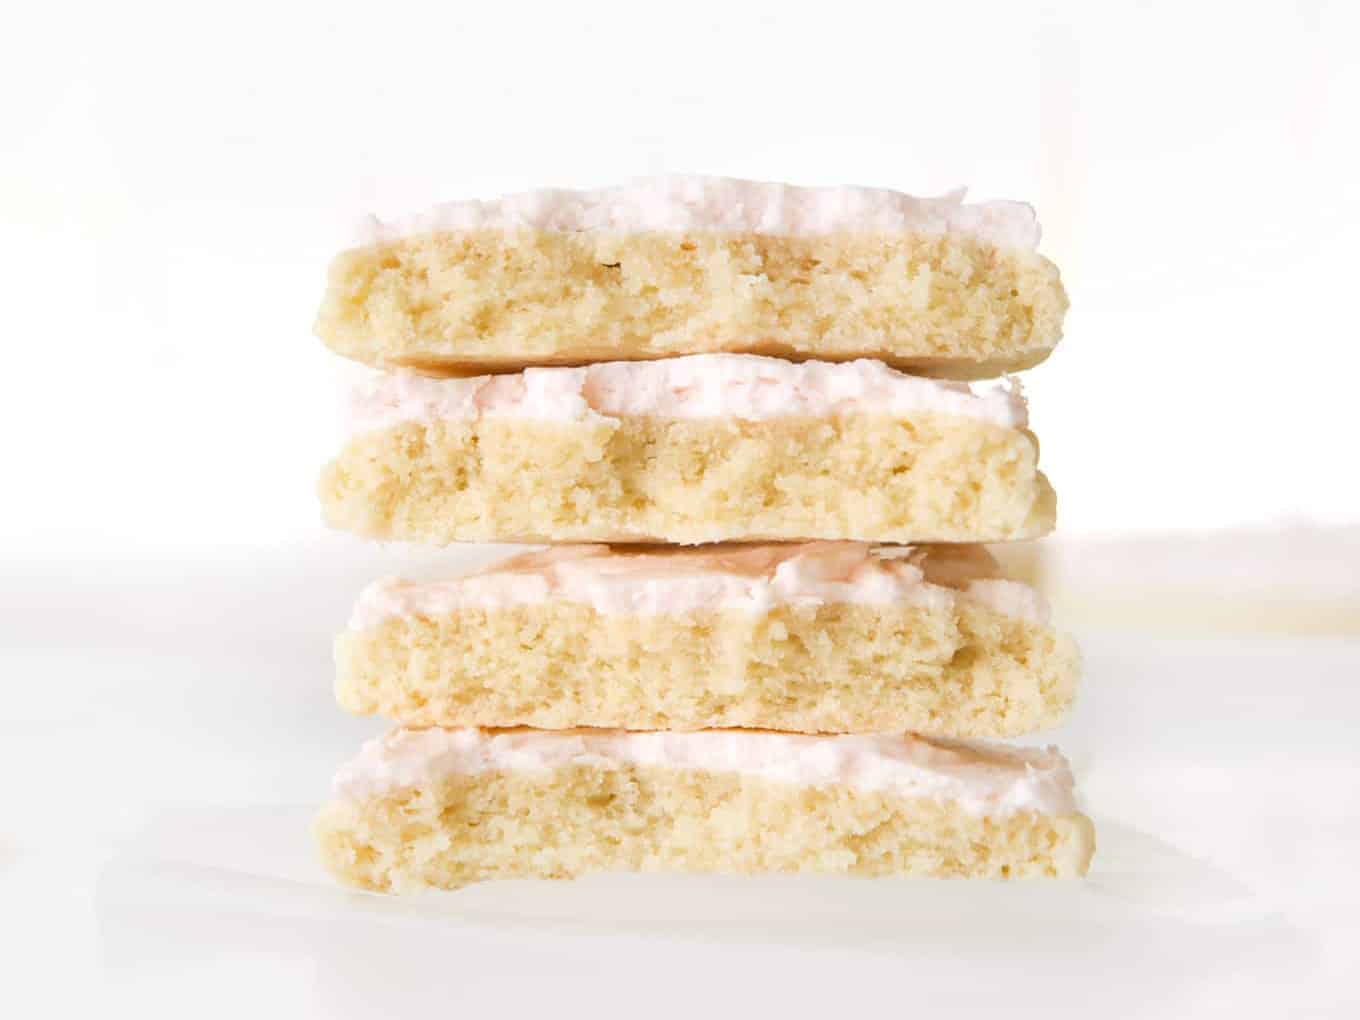 Stack of two large sugar cookies with pink frosting, cut in half.